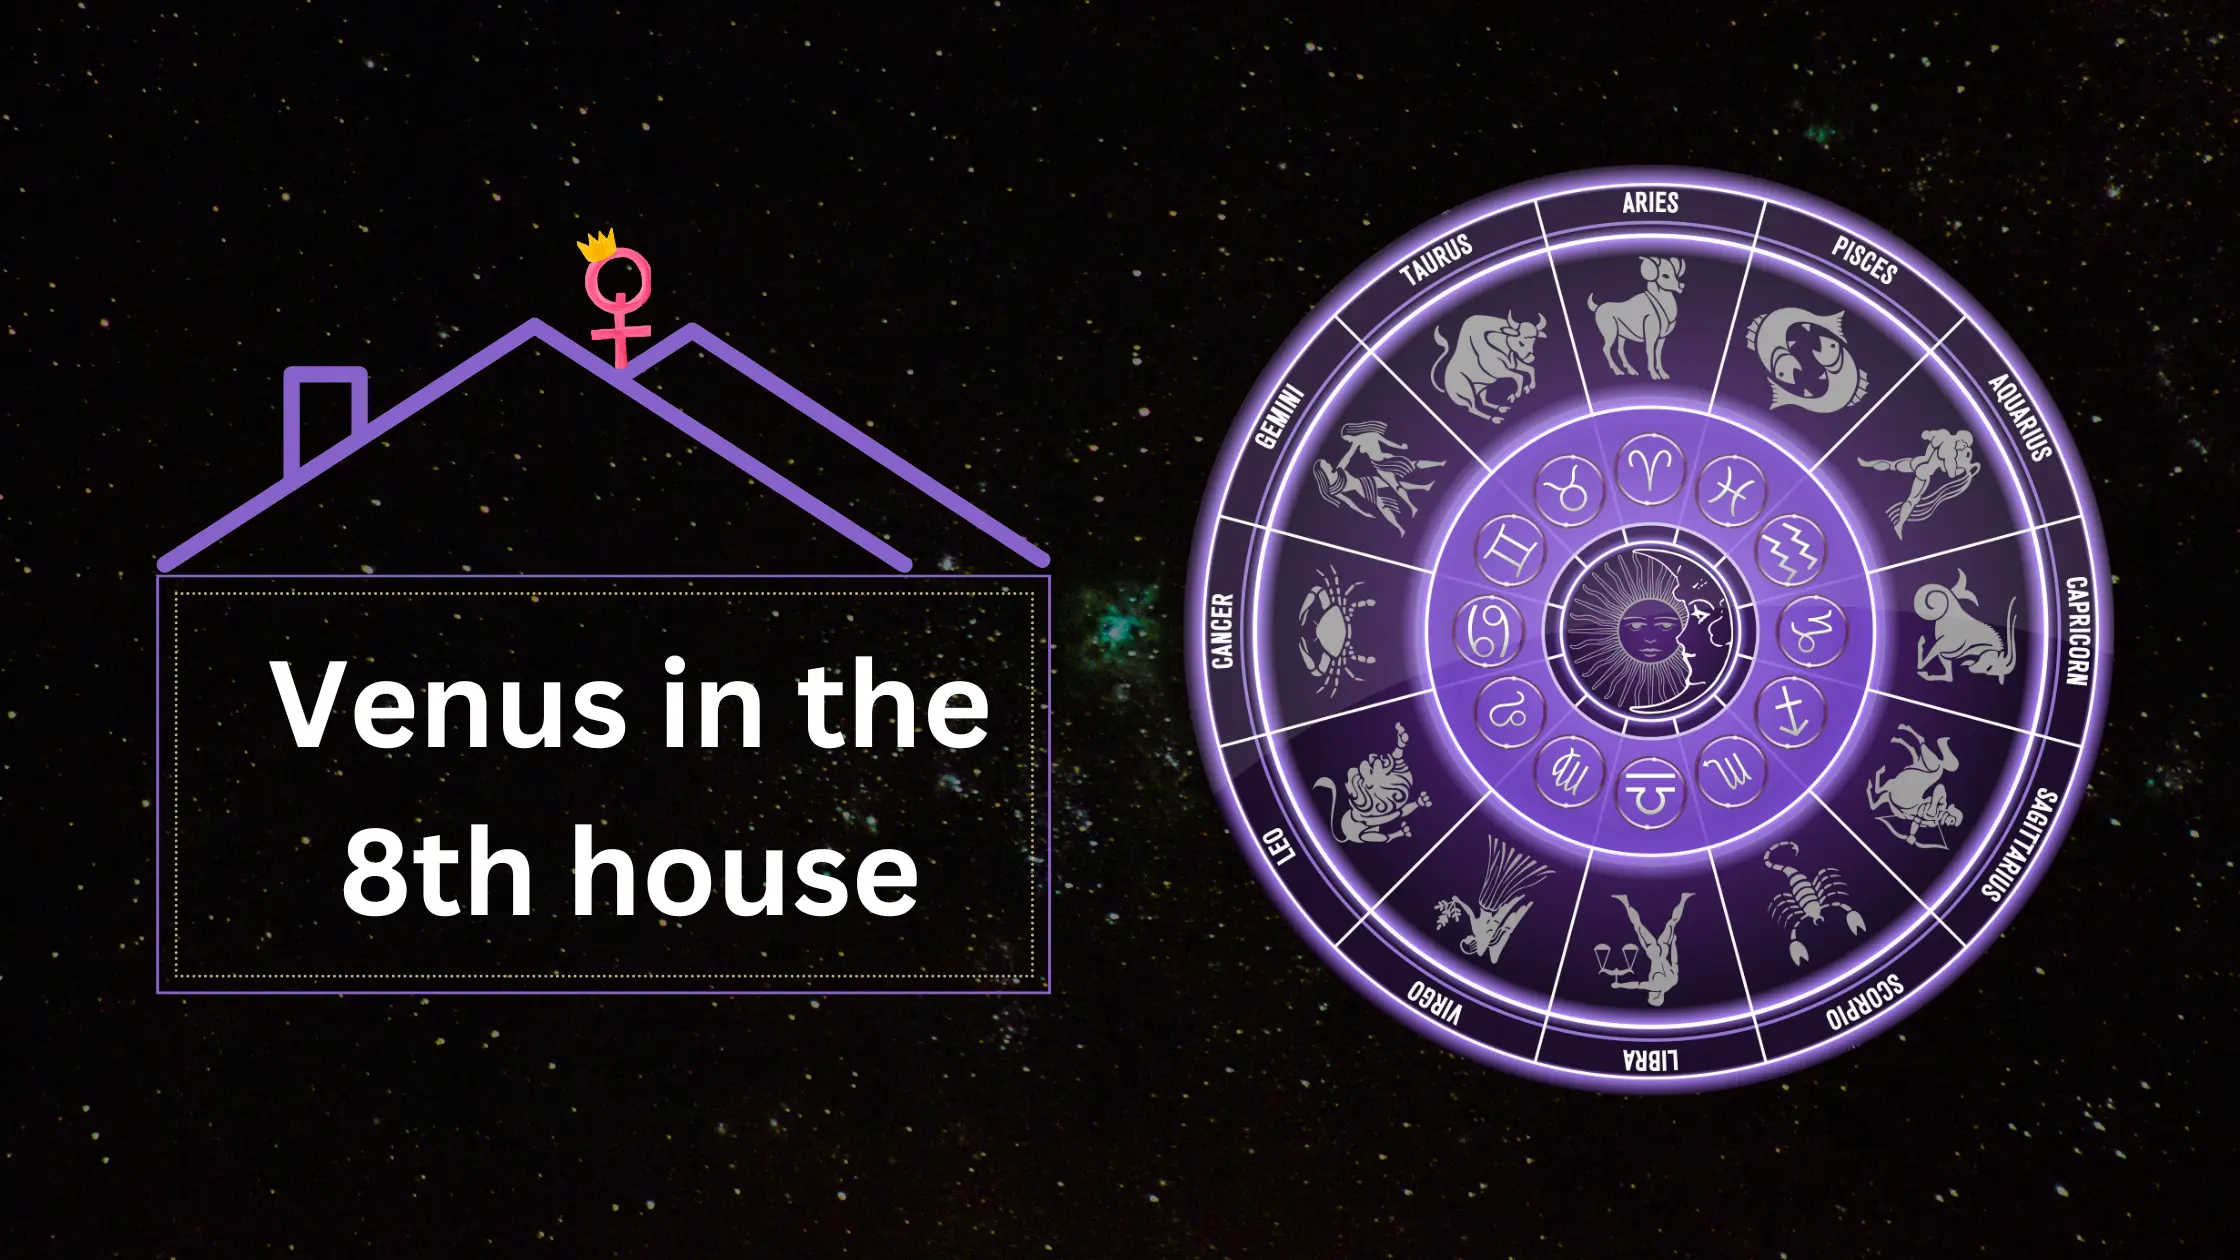 Venus in the 8th house